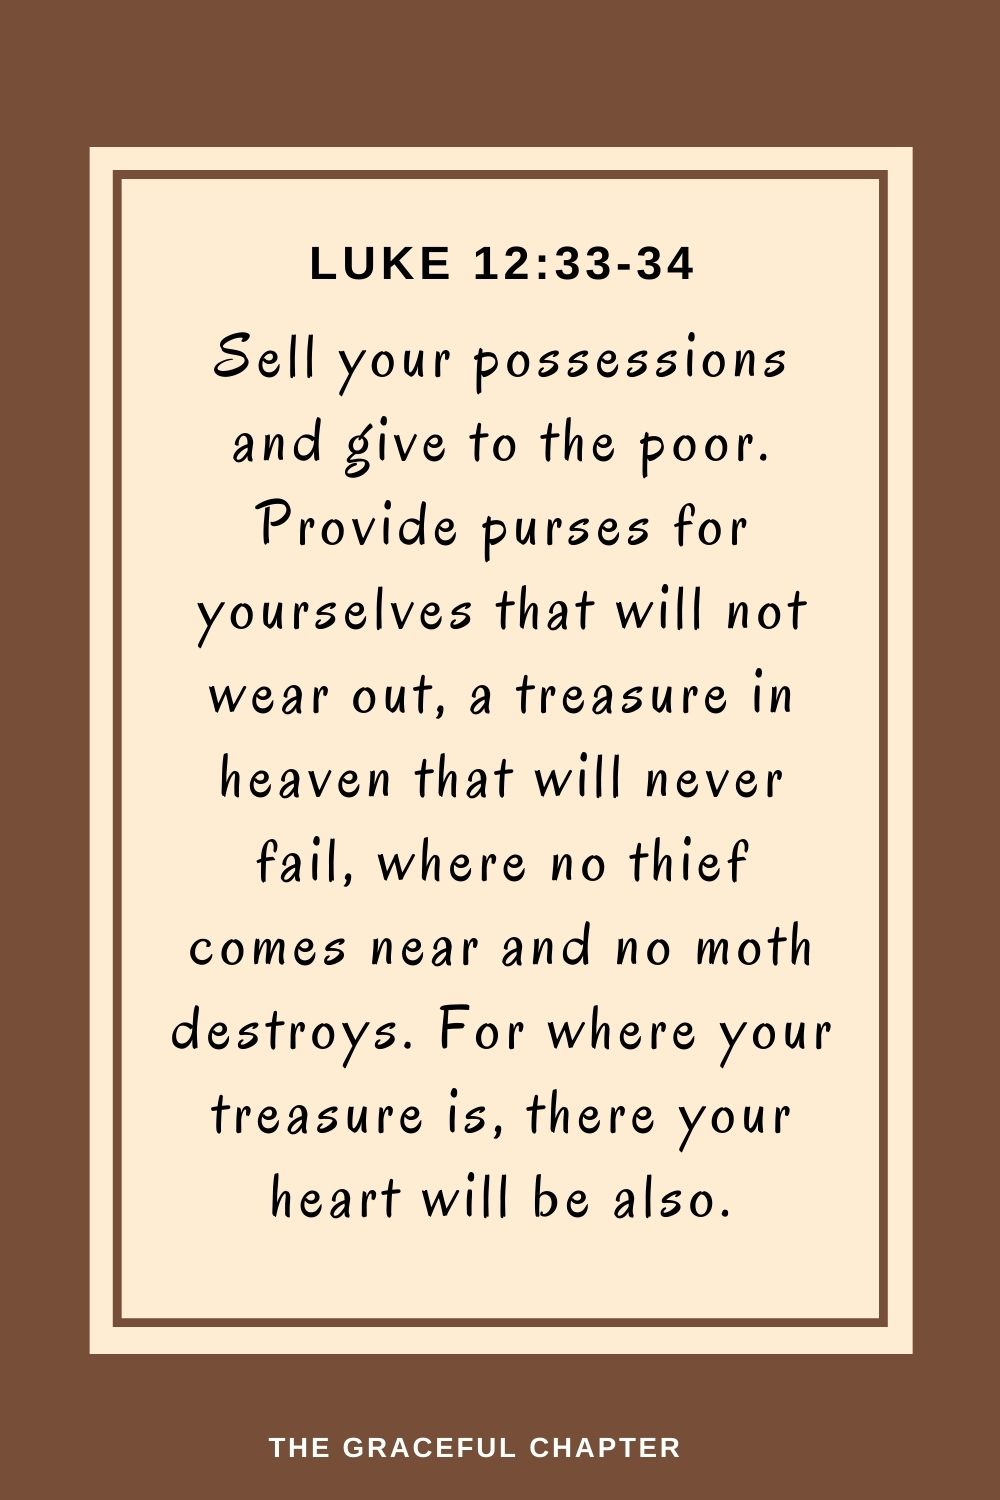 Sell your possessions and give to the poor. Provide purses for yourselves that will not wear out, a treasure in heaven that will never fail, where no thief comes near and no moth destroys. For where your treasure is, there your heart will be also. Luke 12:33-34